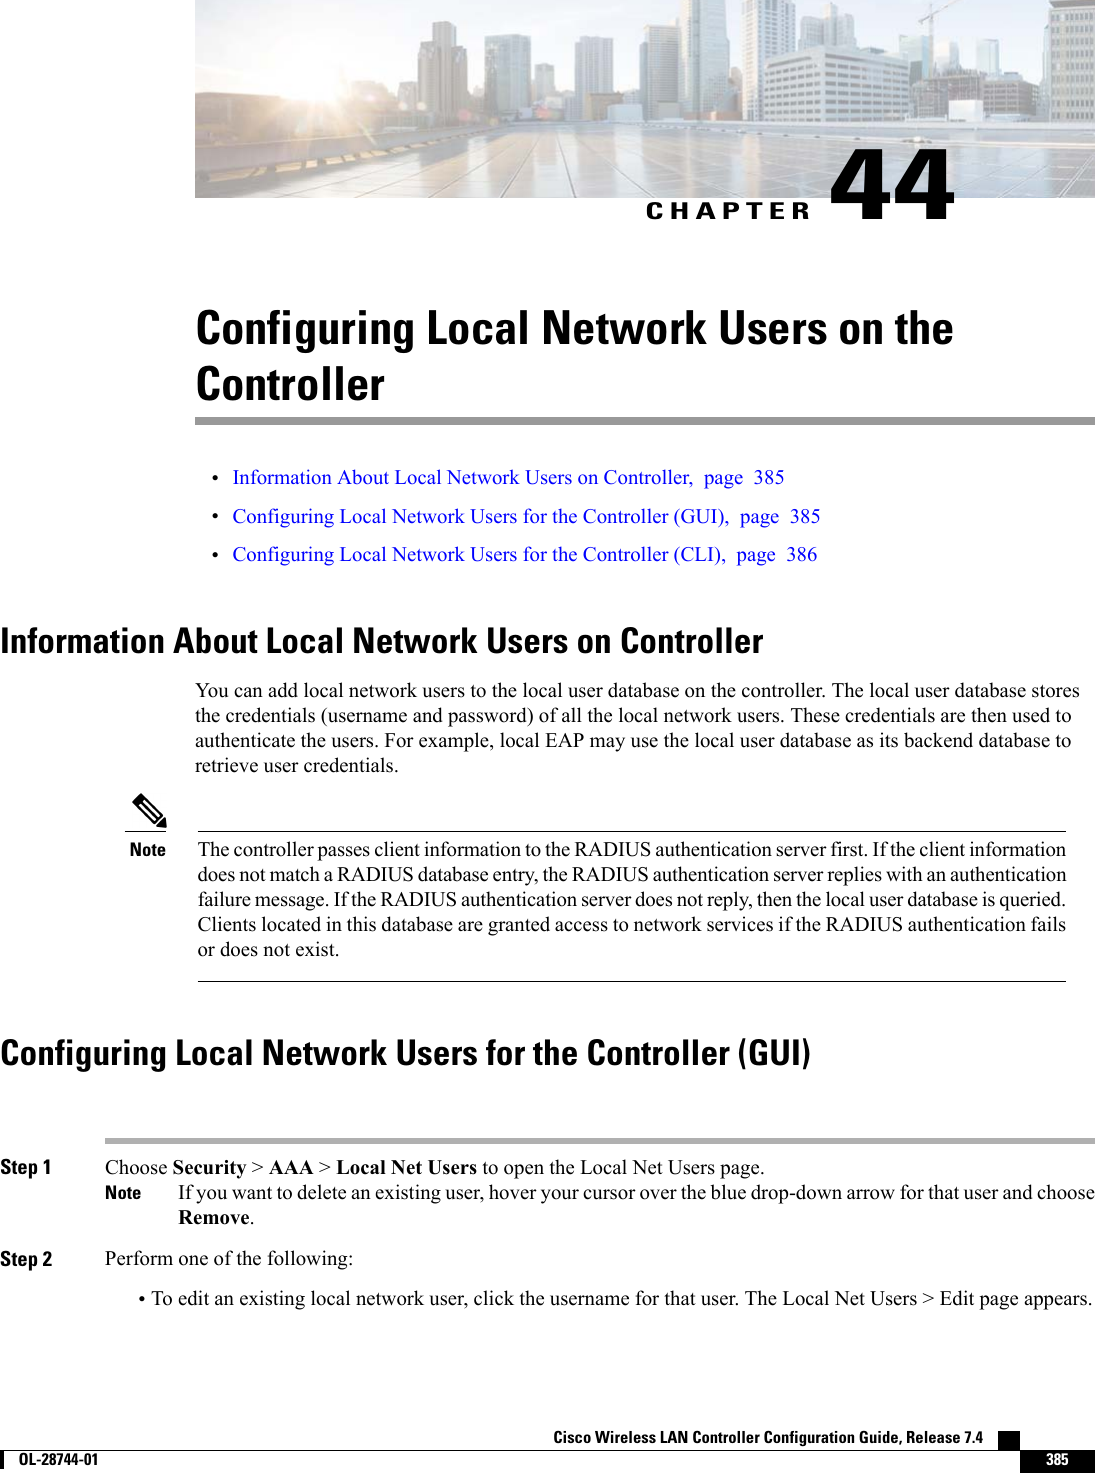 CHAPTER 44Configuring Local Network Users on theController•Information About Local Network Users on Controller, page 385•Configuring Local Network Users for the Controller (GUI), page 385•Configuring Local Network Users for the Controller (CLI), page 386Information About Local Network Users on ControllerYou can add local network users to the local user database on the controller. The local user database storesthe credentials (username and password) of all the local network users. These credentials are then used toauthenticate the users. For example, local EAP may use the local user database as its backend database toretrieve user credentials.The controller passes client information to the RADIUS authentication server first. If the client informationdoes not match a RADIUS database entry, the RADIUS authentication server replies with an authenticationfailure message. If the RADIUS authentication server does not reply, then the local user database is queried.Clients located in this database are granted access to network services if the RADIUS authentication failsor does not exist.NoteConfiguring Local Network Users for the Controller (GUI)Step 1 Choose Security &gt;AAA &gt;Local Net Users to open the Local Net Users page.If you want to delete an existing user, hover your cursor over the blue drop-down arrow for that user and chooseRemove.NoteStep 2 Perform one of the following:•To edit an existing local network user, click the username for that user. The Local Net Users &gt; Edit page appears.Cisco Wireless LAN Controller Configuration Guide, Release 7.4        OL-28744-01 385